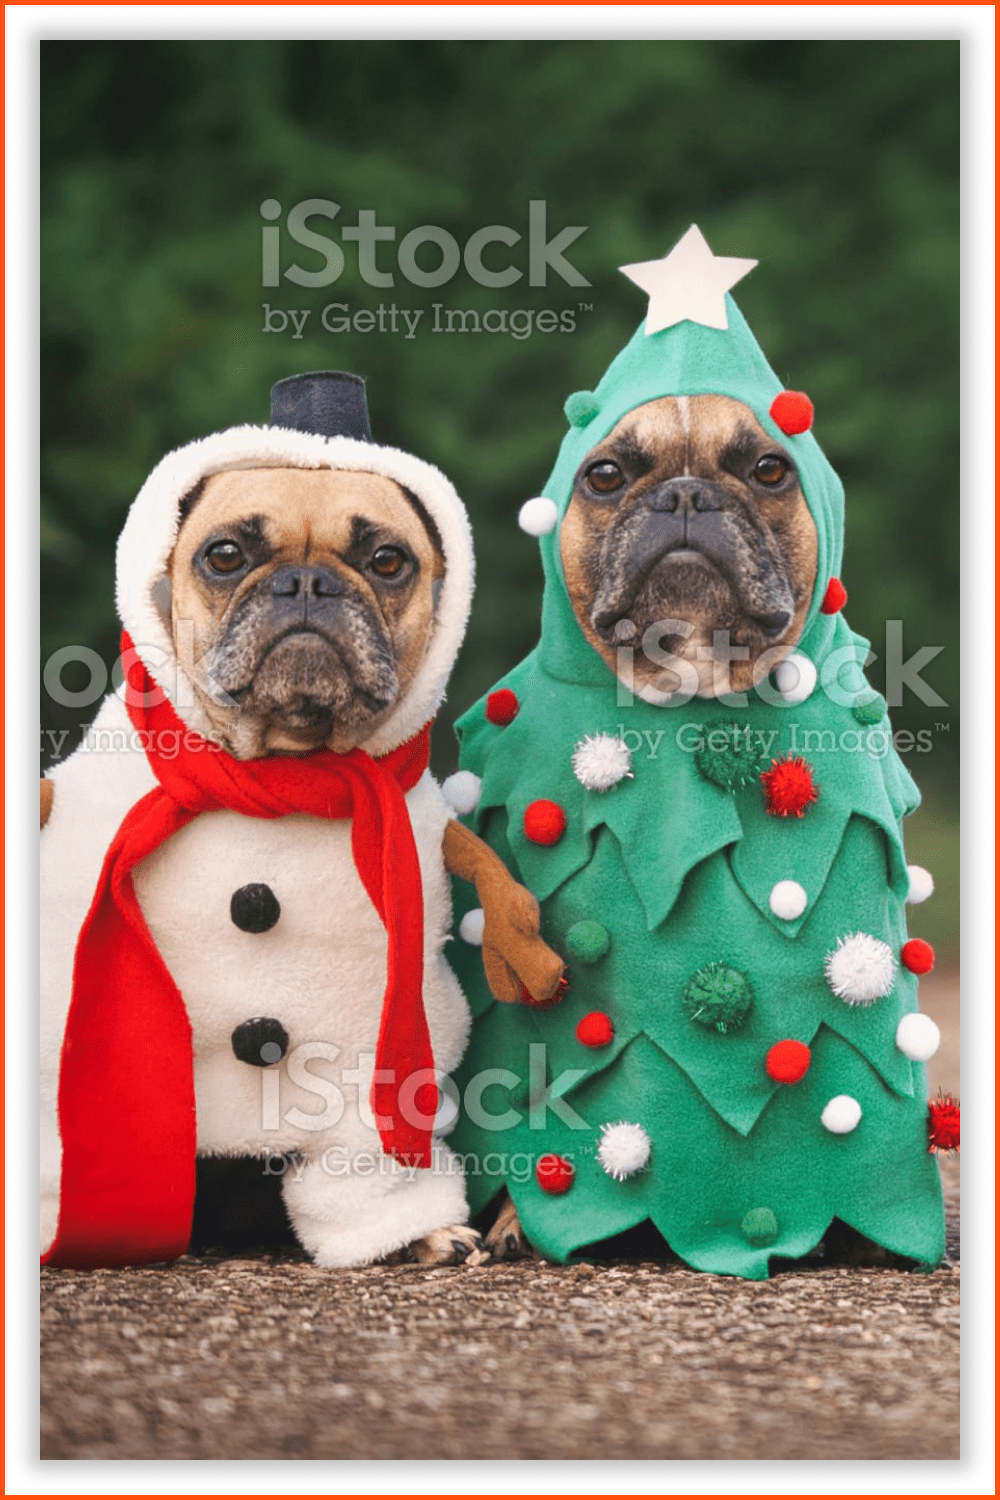 Cute Dogs in white and green Christmas costumes.